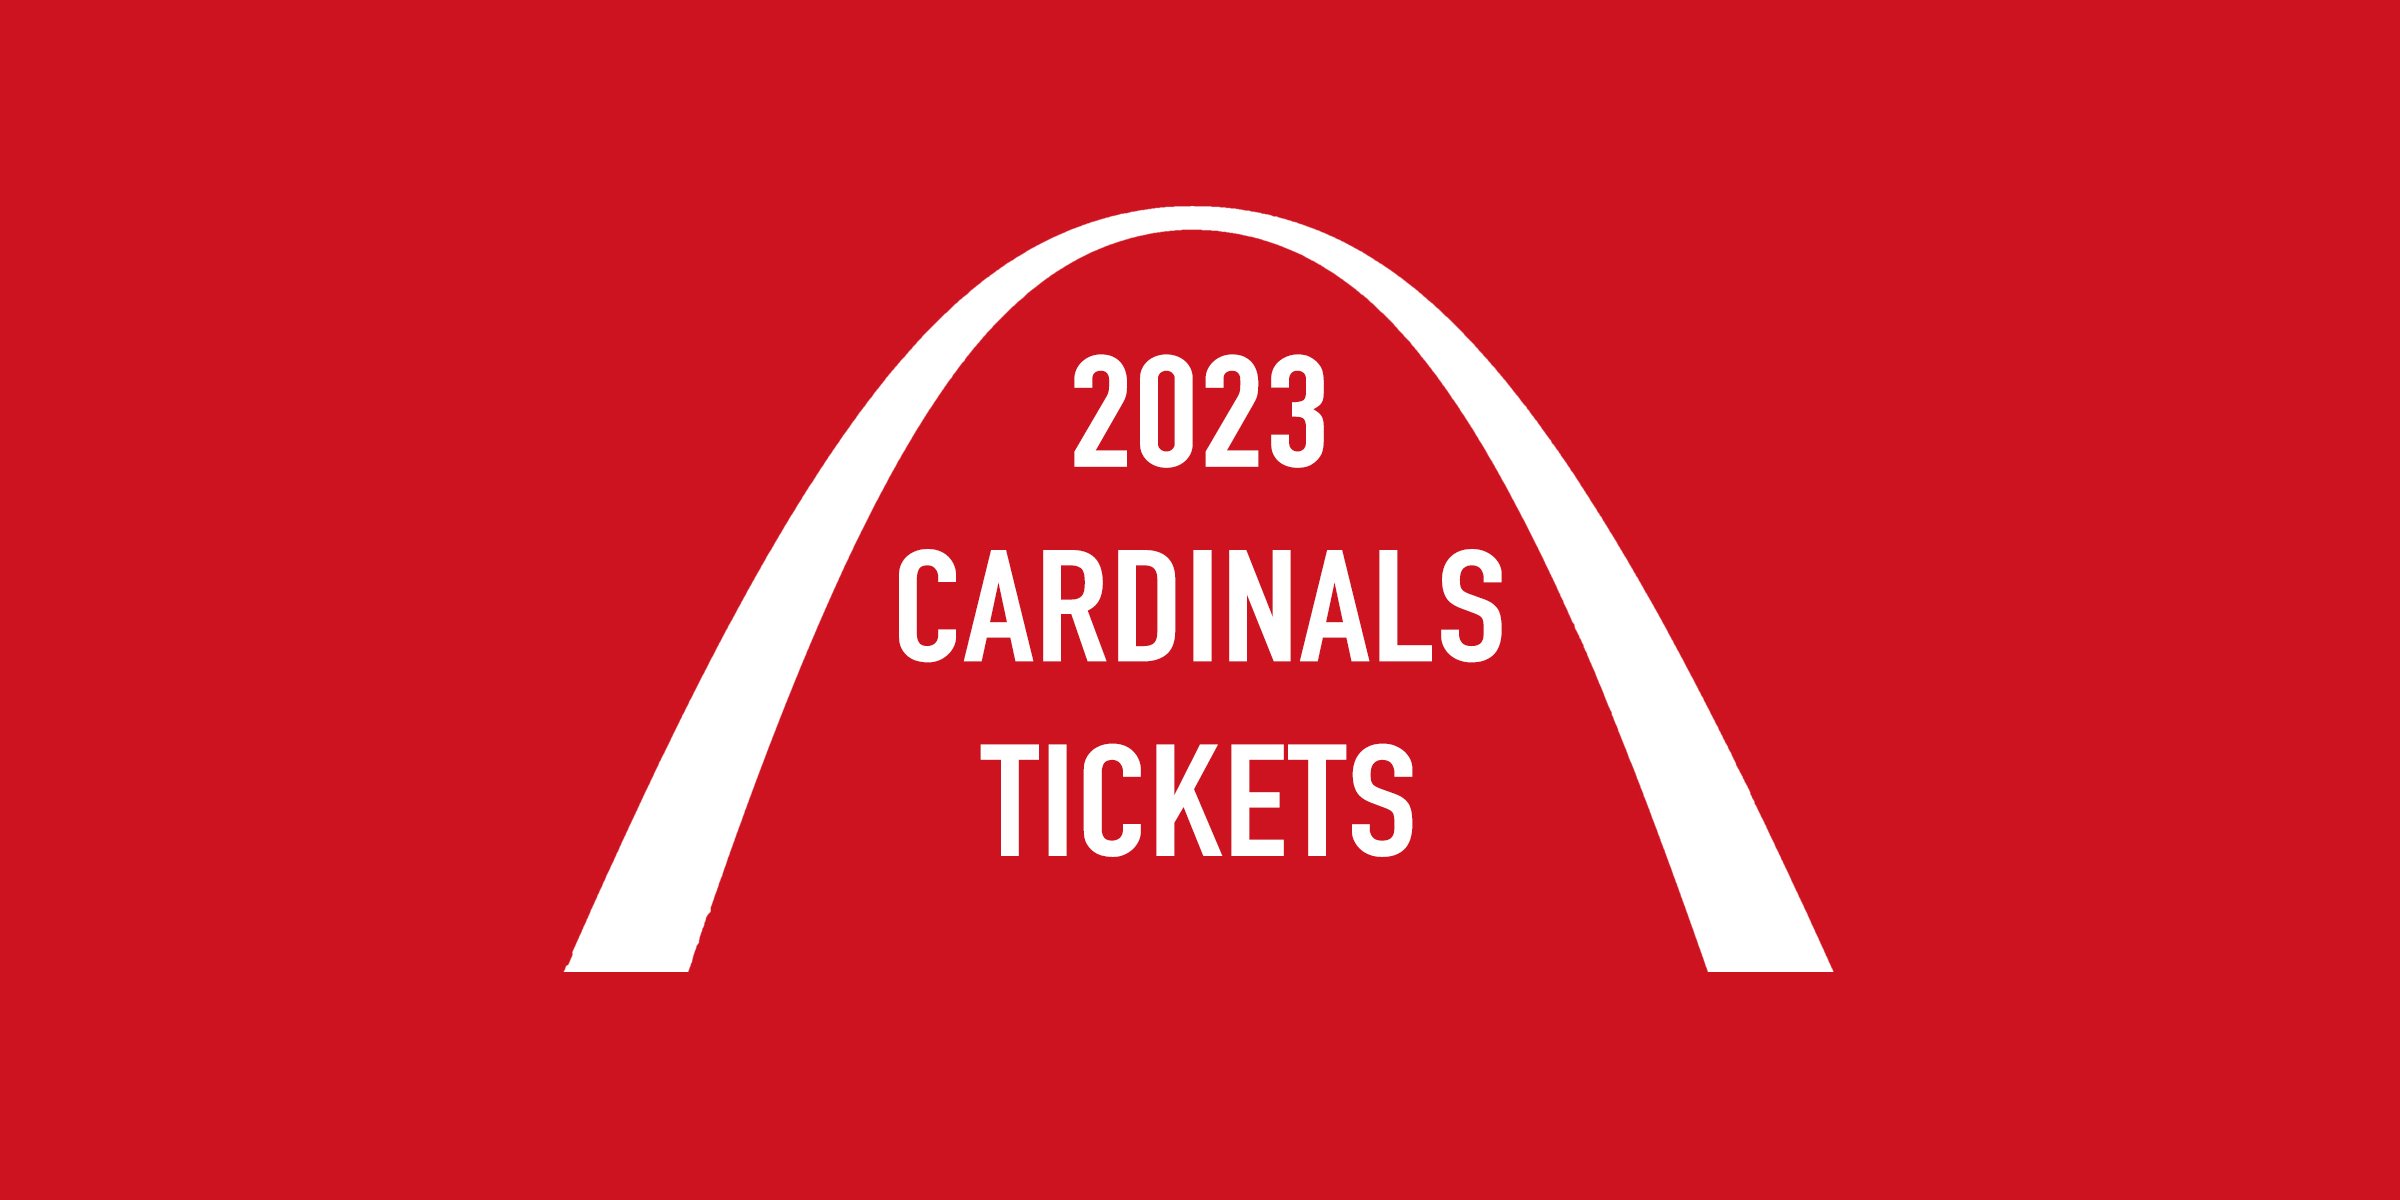 St. Louis Cardinals Opening Day Tickets 2023!